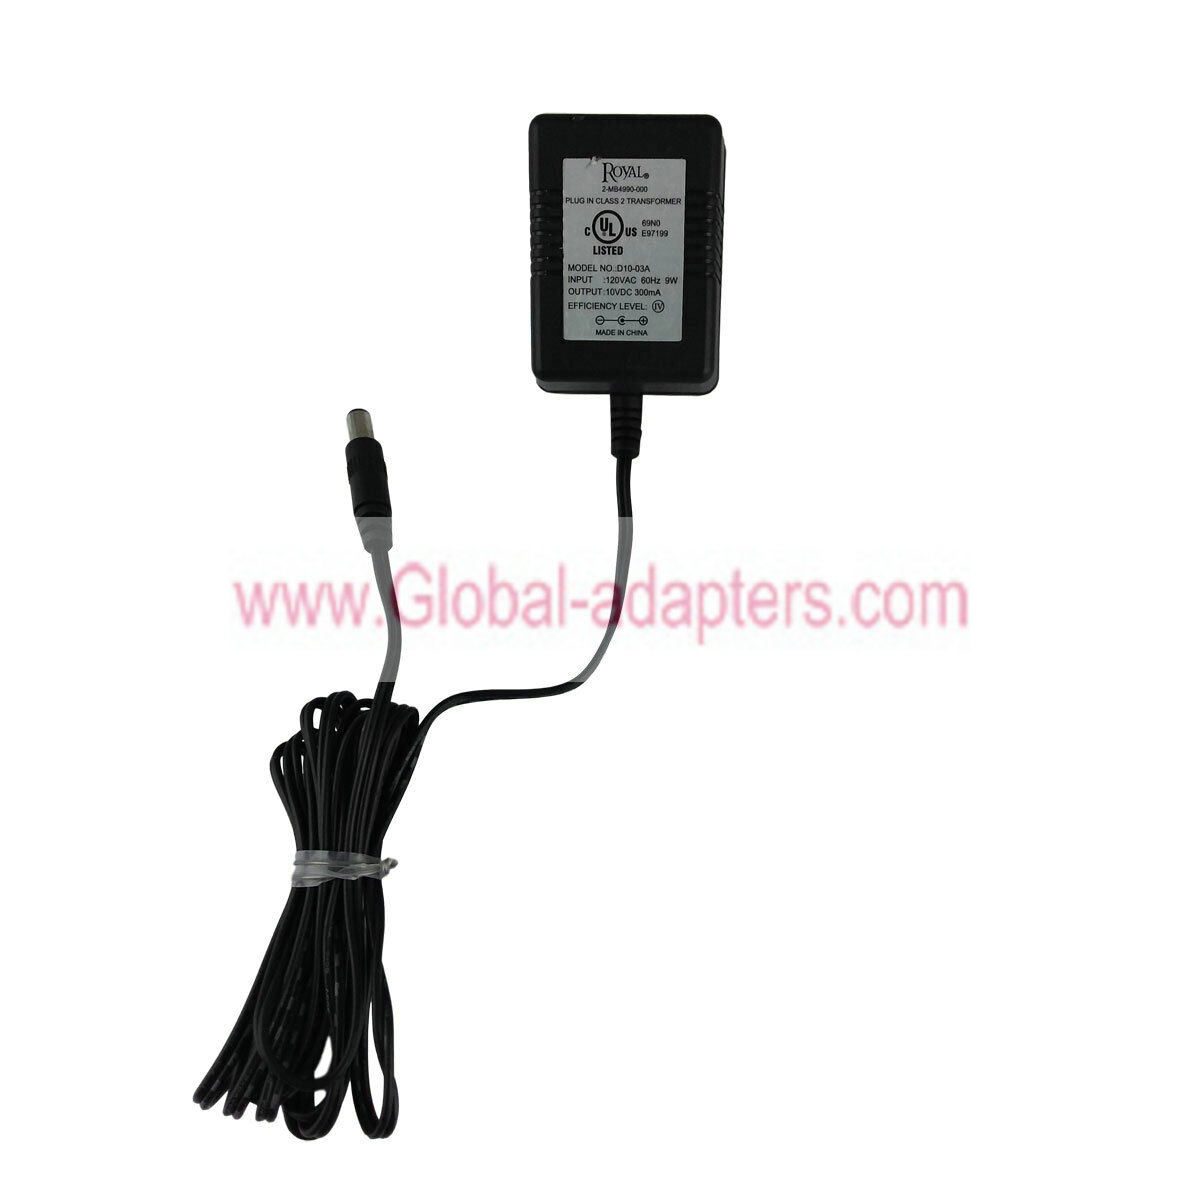 New Royal D10-03A Power Adapter 10V DC 300mA 2-MB4990-000 PLUG-IN CLASS 2 TRANSFORMER AC ADAPTER - Click Image to Close